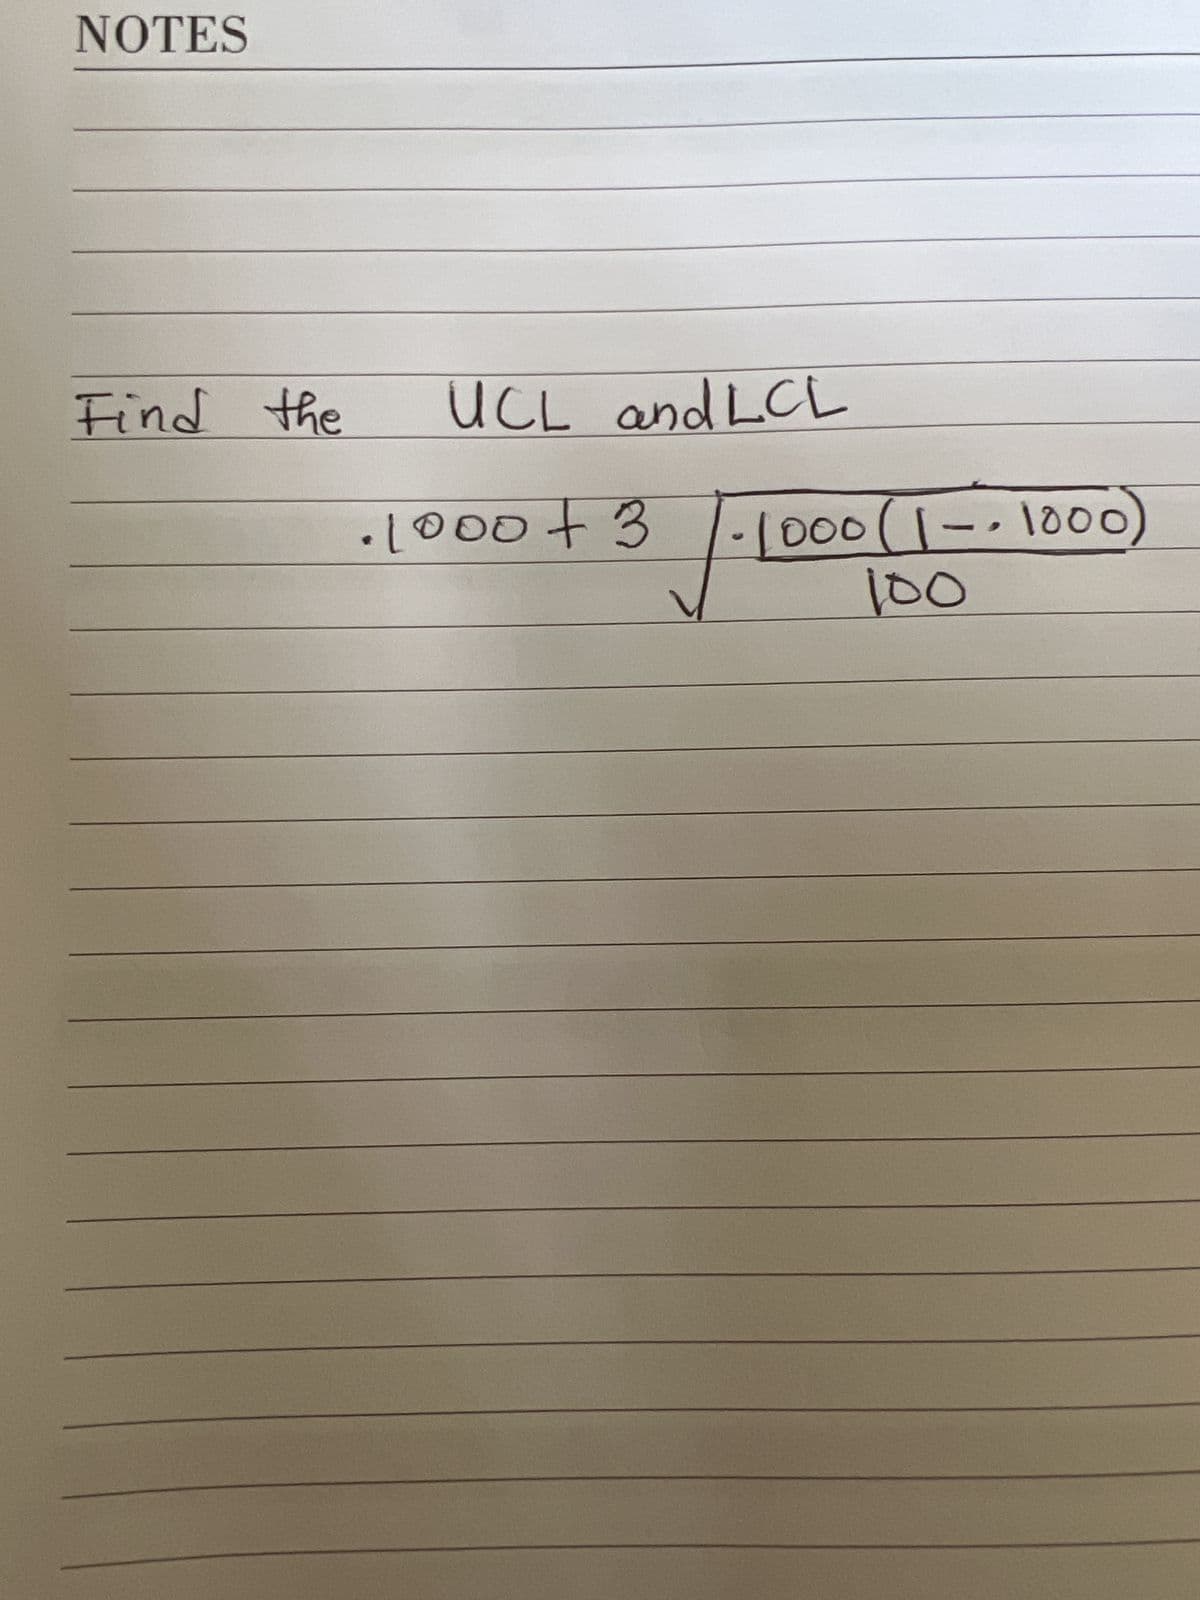 NOTES
Find the
UCL and LCL
.1000 +3
3
1000 (1-1000)
100